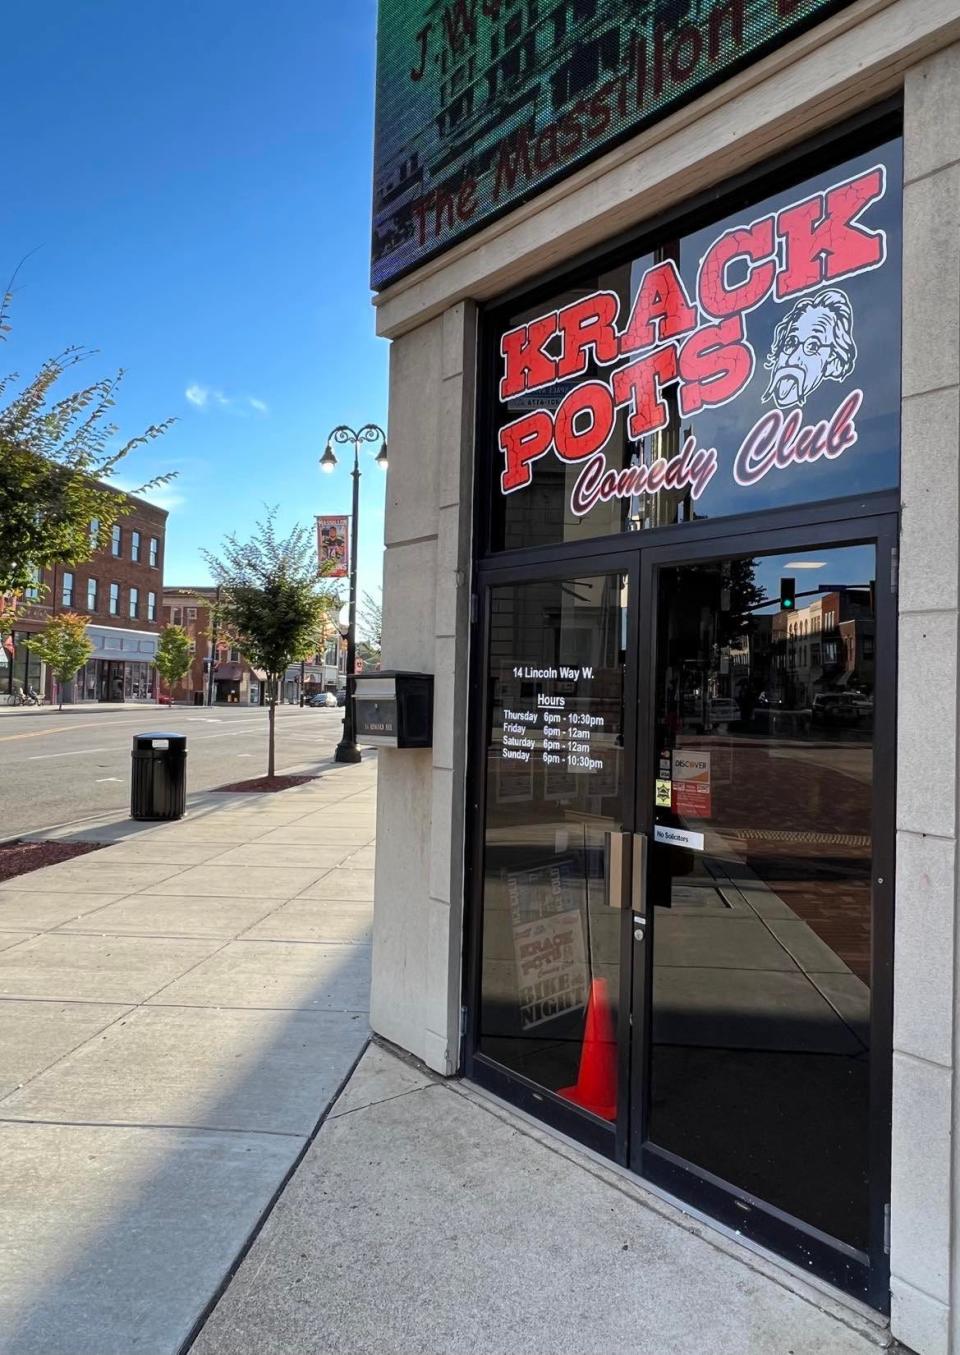 Krackpots Comedy Club, 14 Lincoln Way W in downtown Massillon, features open mic nights, nationally touring comedians, comedy workshops, food, alcoholic beverages and other attractions.